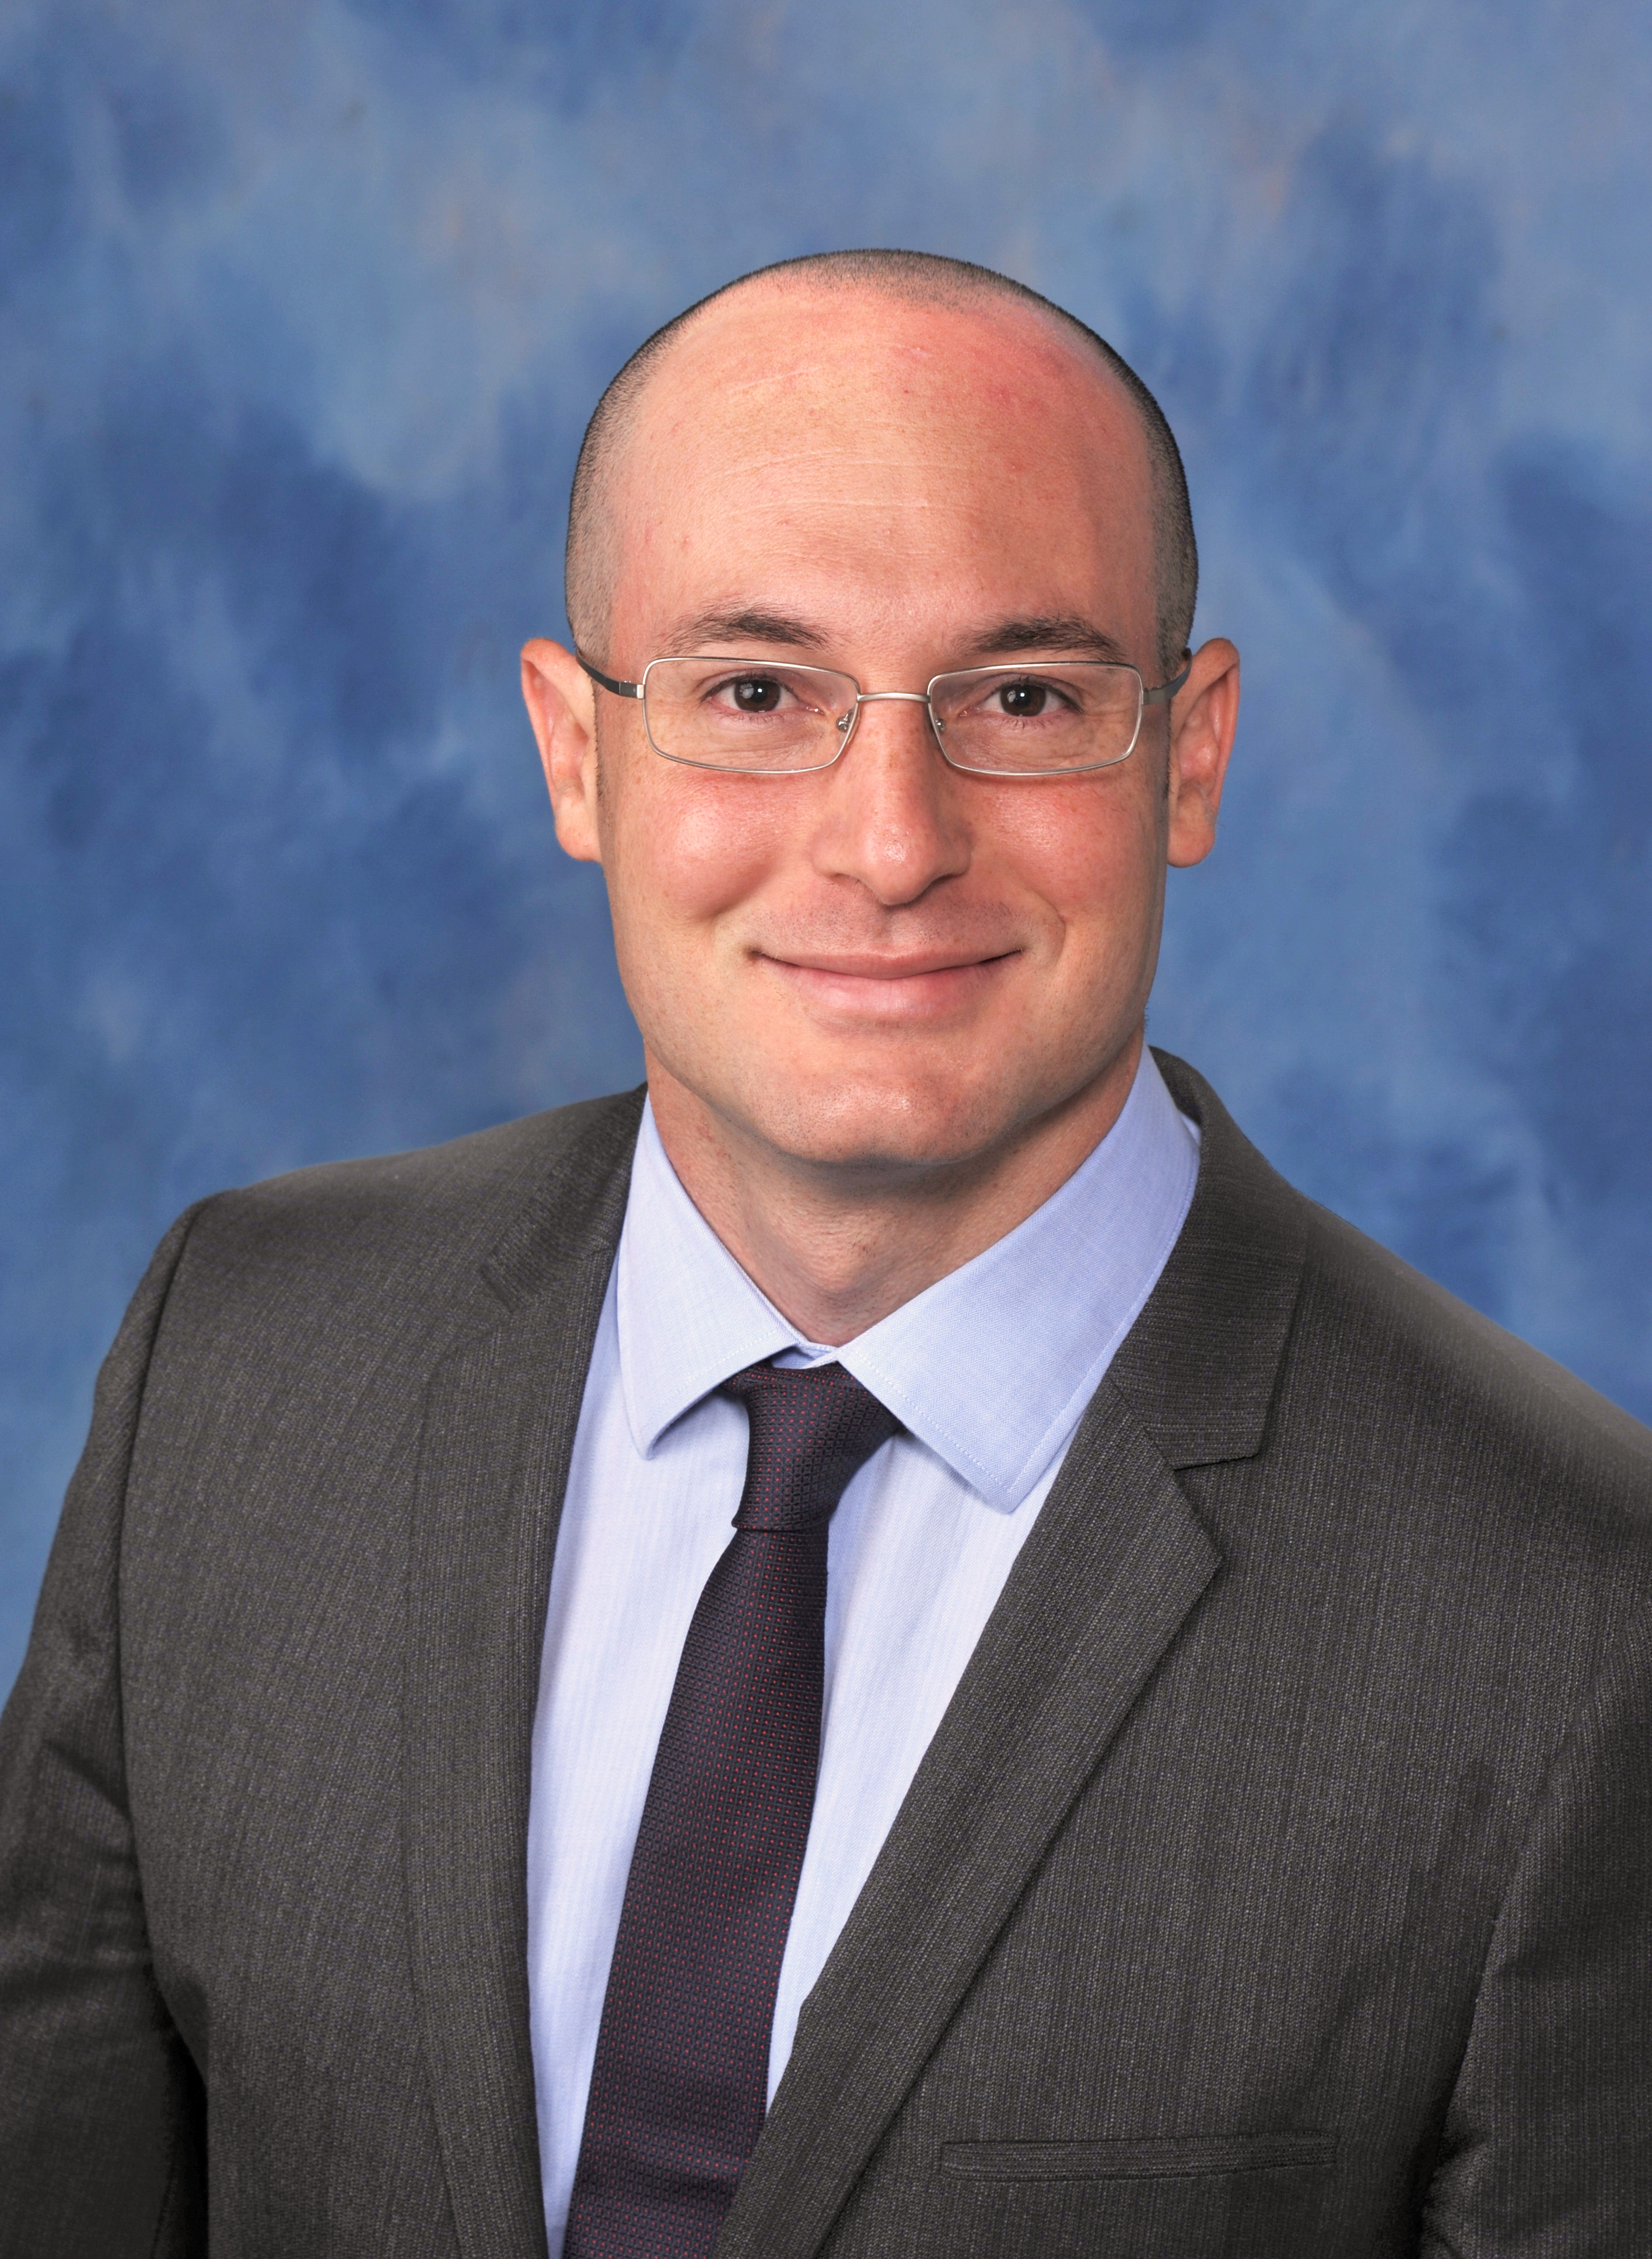 Daniel Benhayon Lanes, MD, is a cardiac electrophysiologist at Memorial Cardiac and Vascular Institute that specializes in the management of atrial fibrillation.